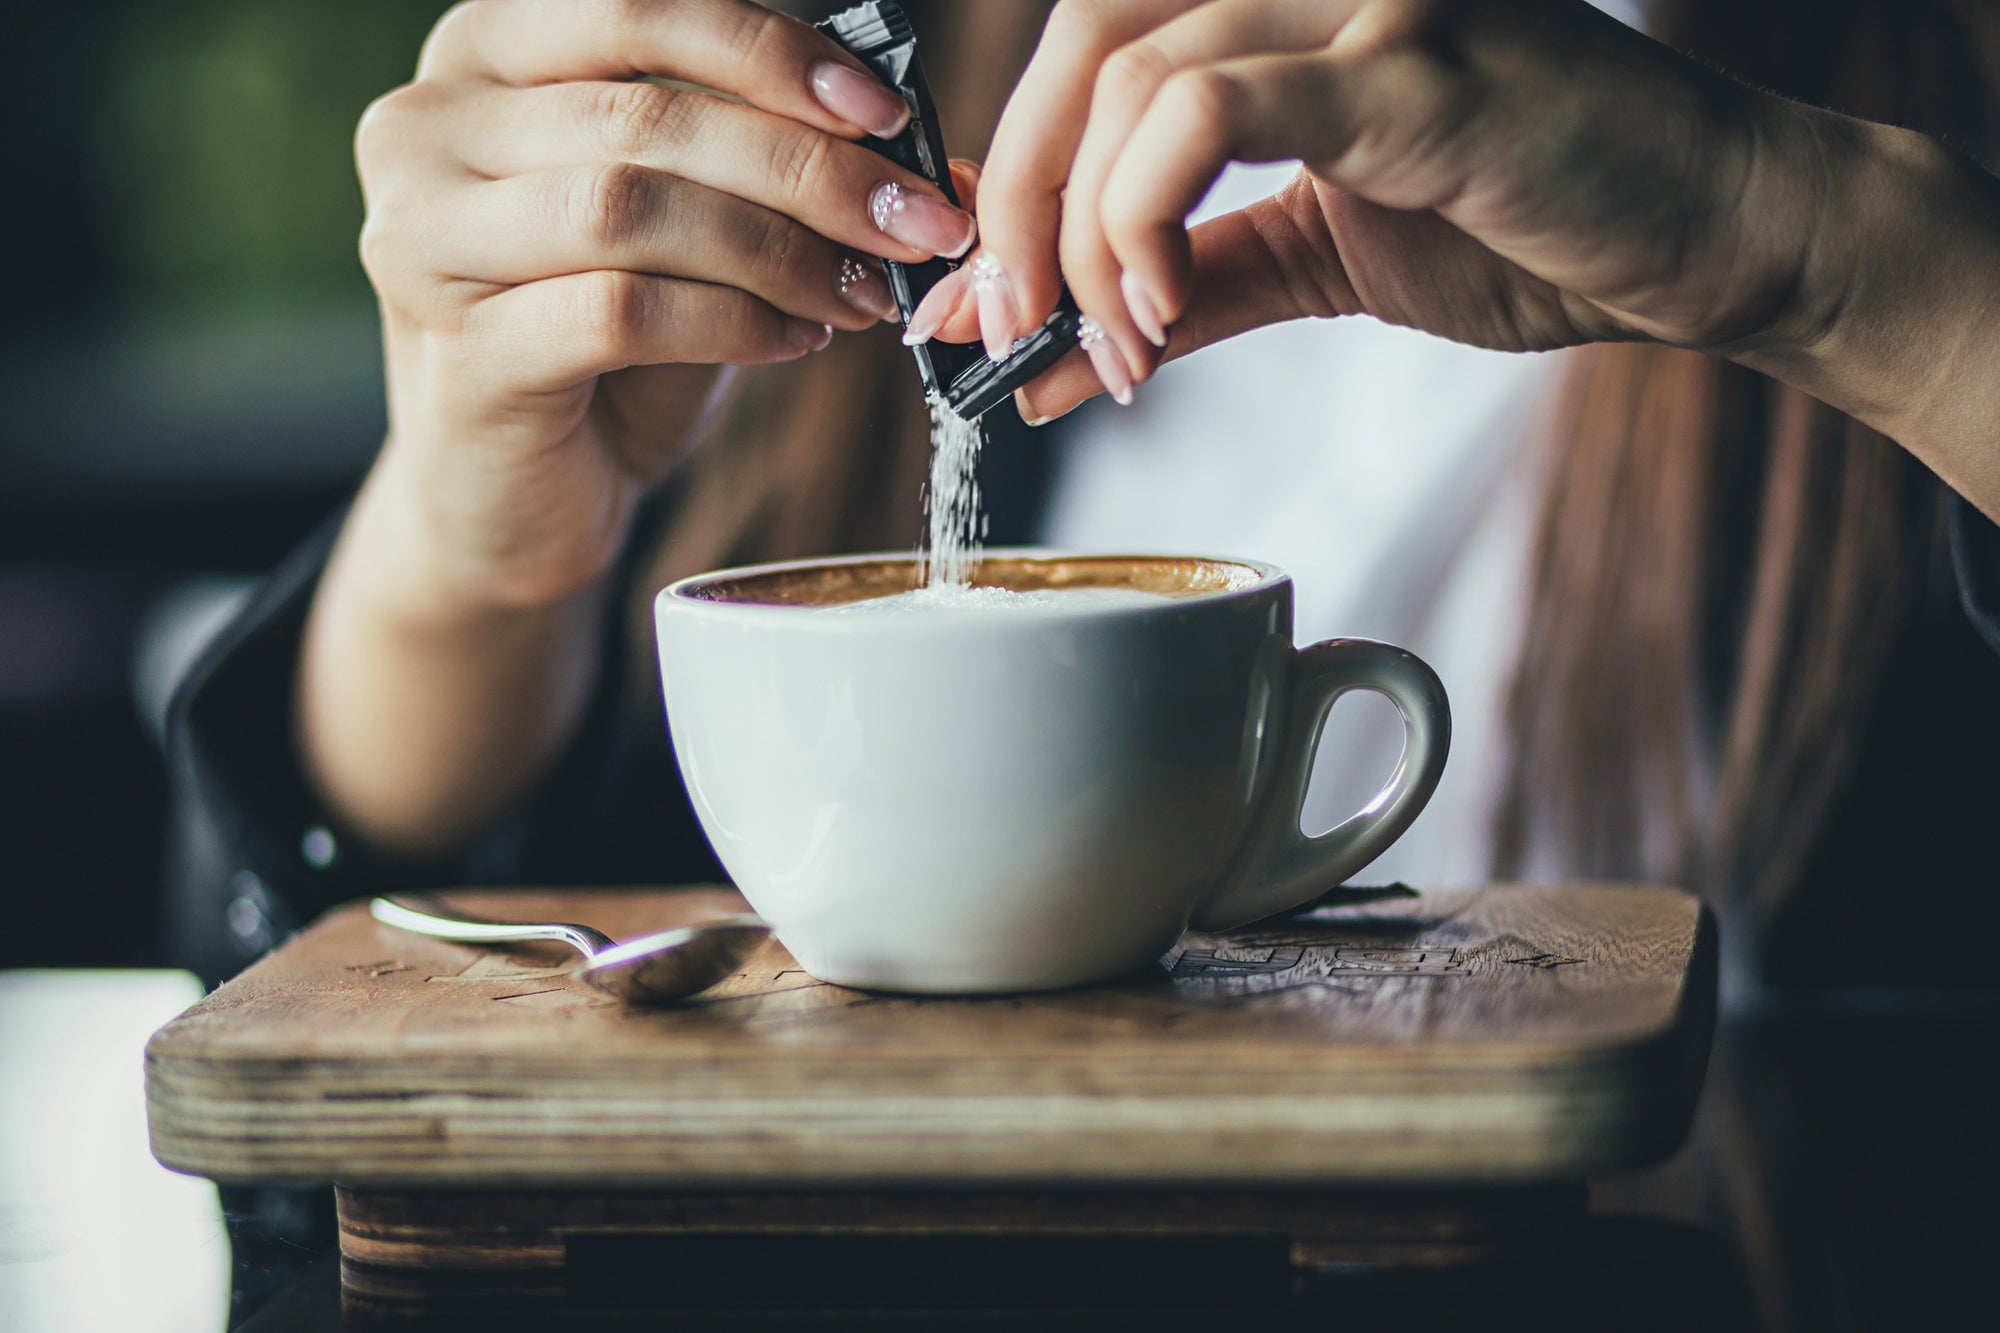 Artificial sweeteners and gut health: a hot topic! Image: a closeup of a woman’s hands pouring a packet of sweetener into a cappuccino.